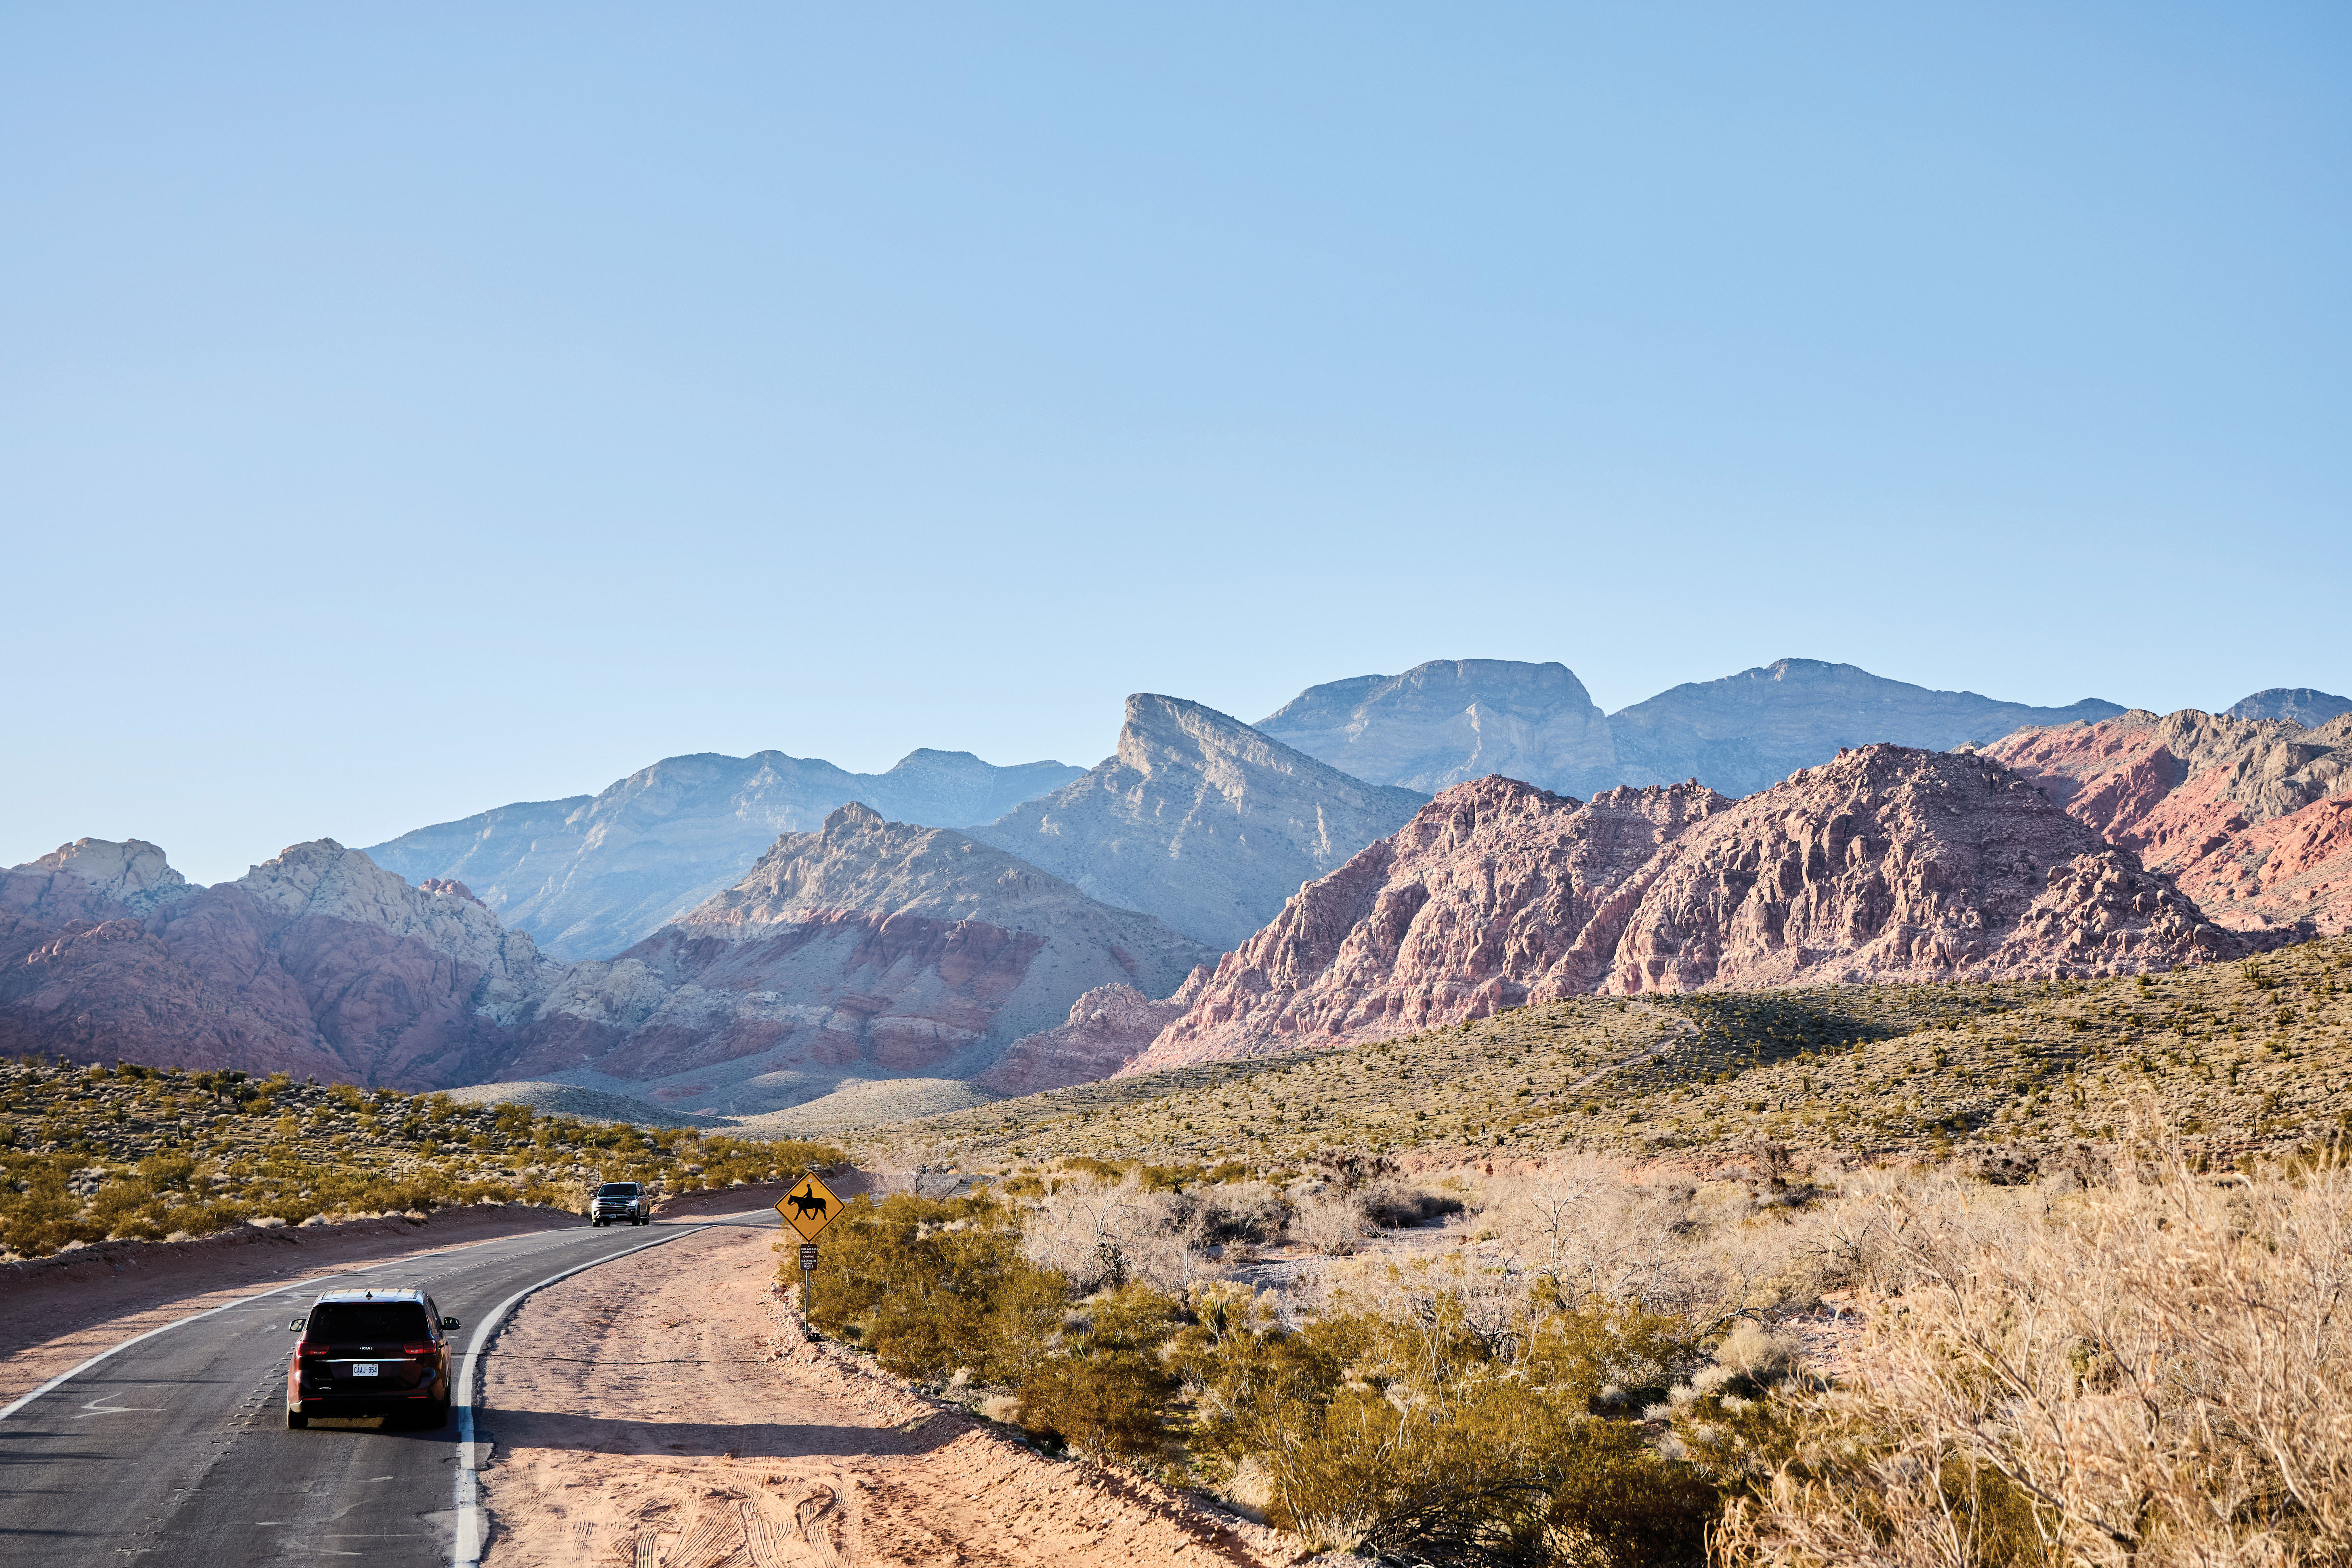 Desert Landscapes: Within a 20 to 30 minute drive from the Las Vegas Strip, the Spring Mountains and Red Rock Canyon Conservation Area begins.